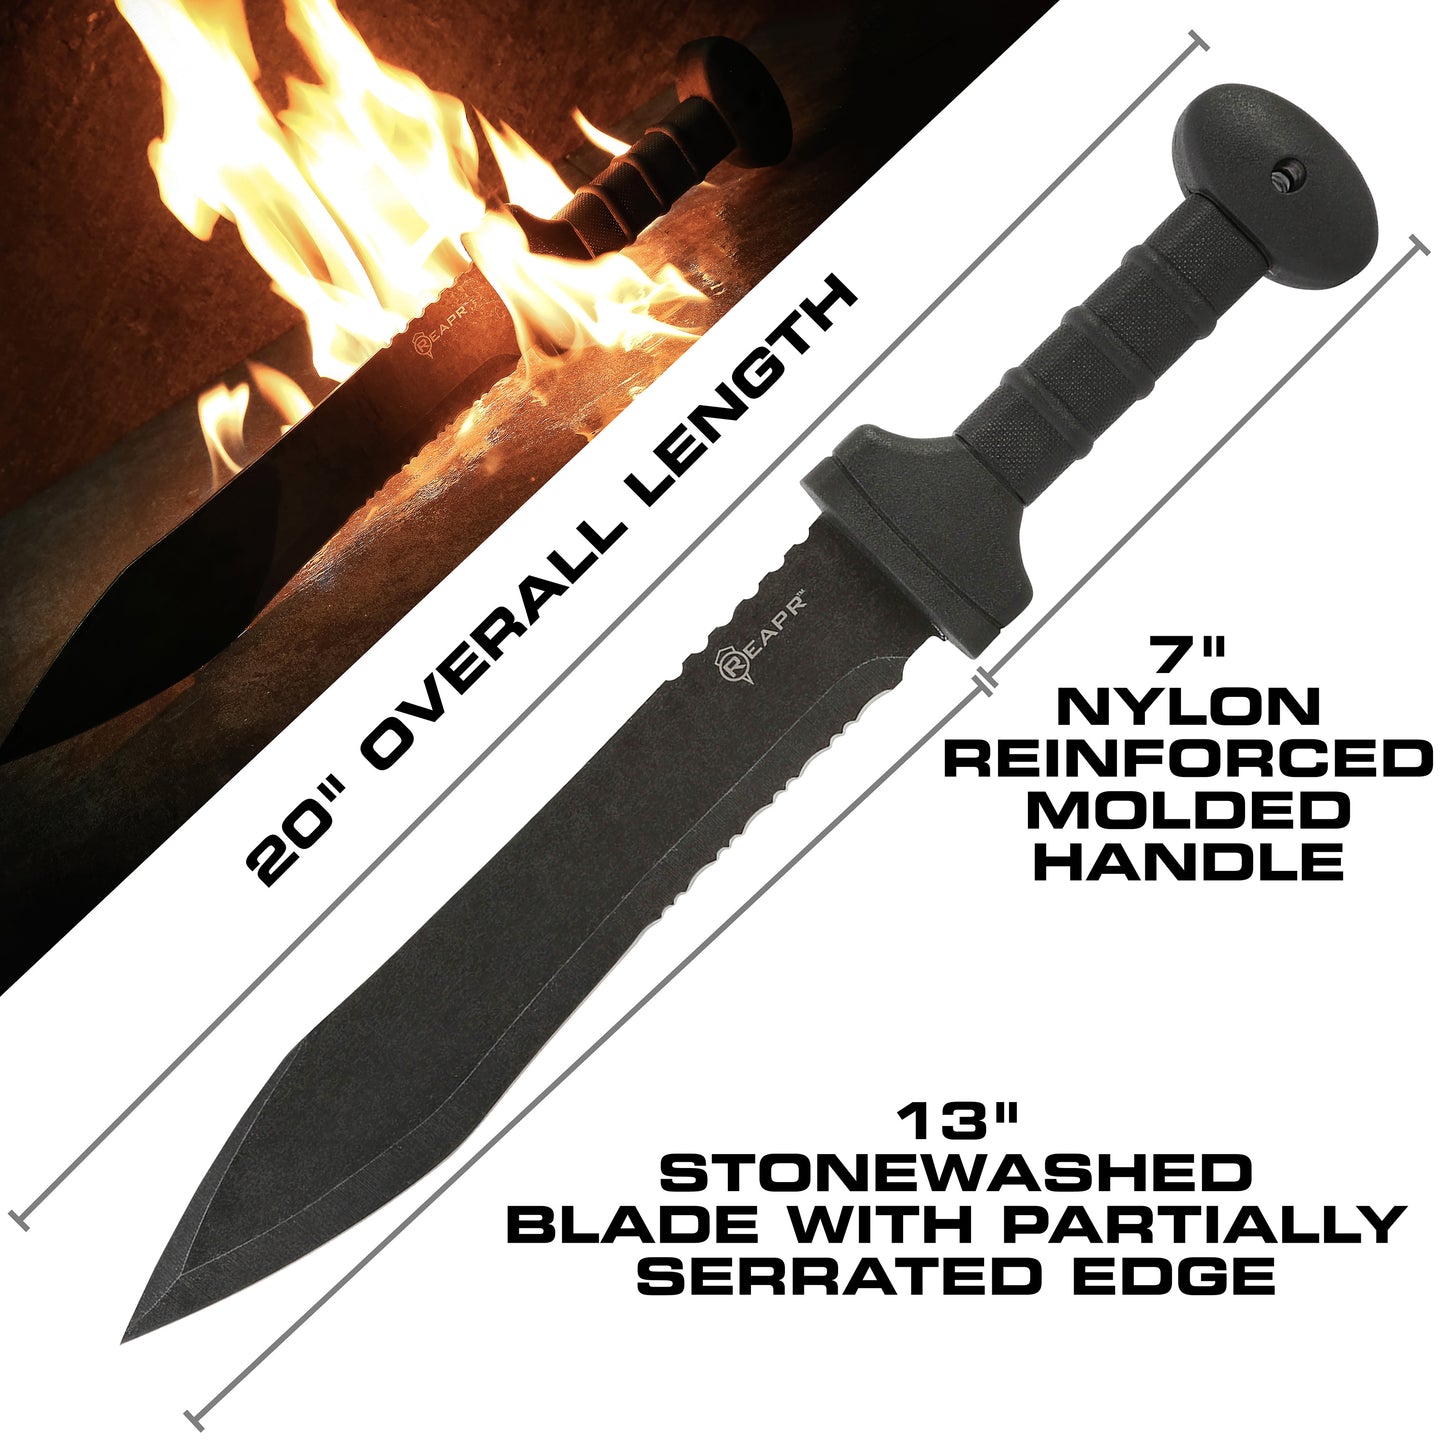  REAPR 11019 Legion Sword multi-purpose sword, perfect for hiking, camping and hunting. 